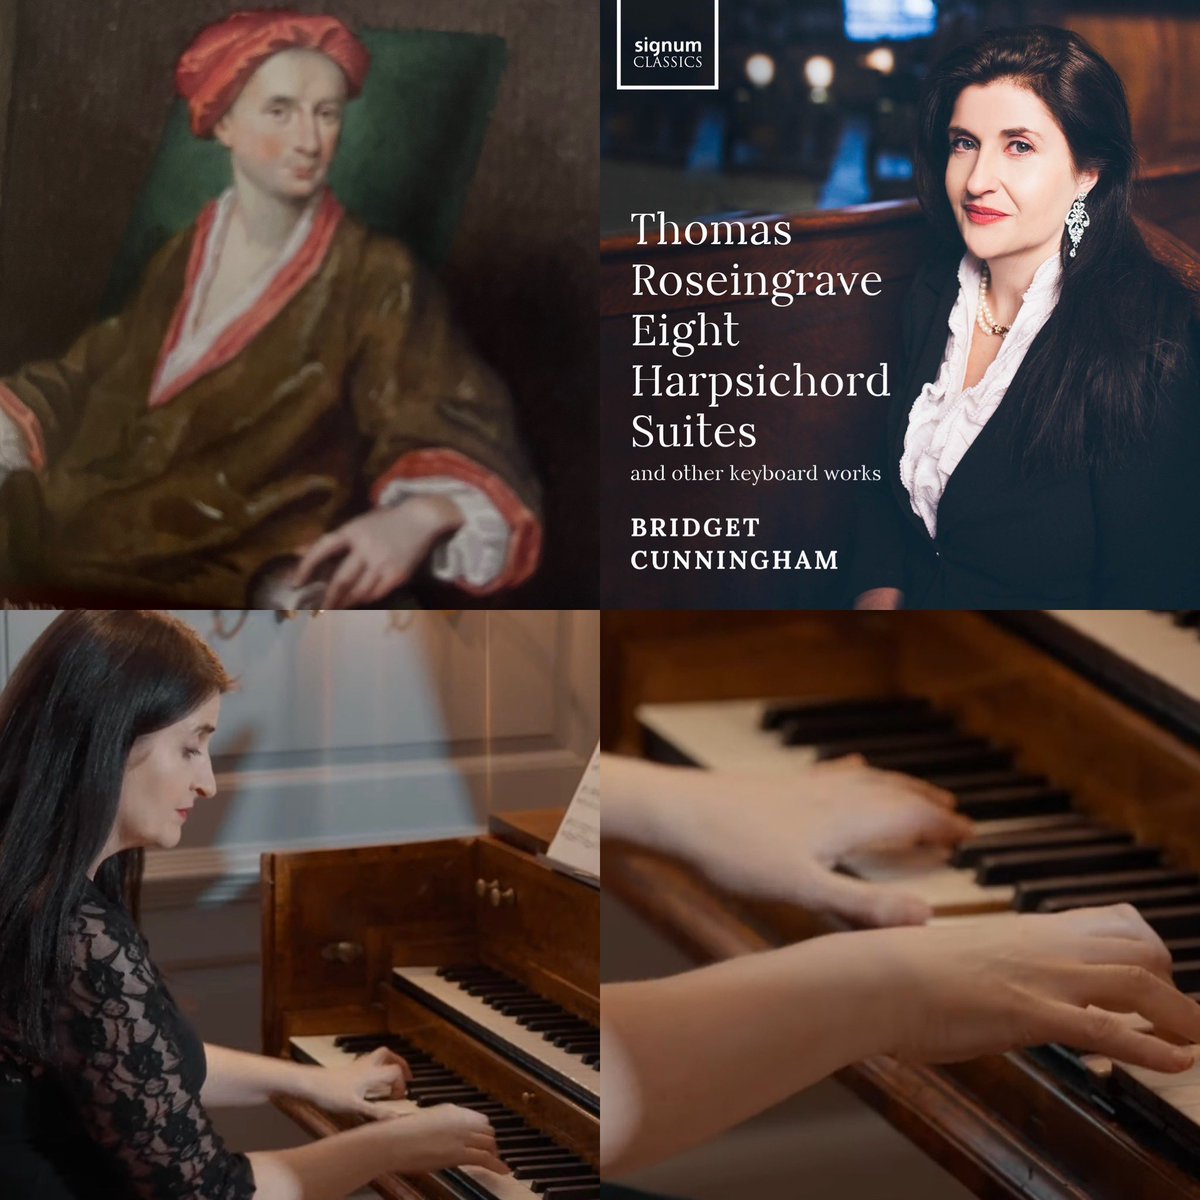 New album release! Thomas Roseingrave suffered heartbreak when he was forbidden to marry his love and was afflicted by severe mental distress but persevered to compose stunning music becoming one of the founders of The Royal Society of Musicians ‘Too prominent to be overlooked’.